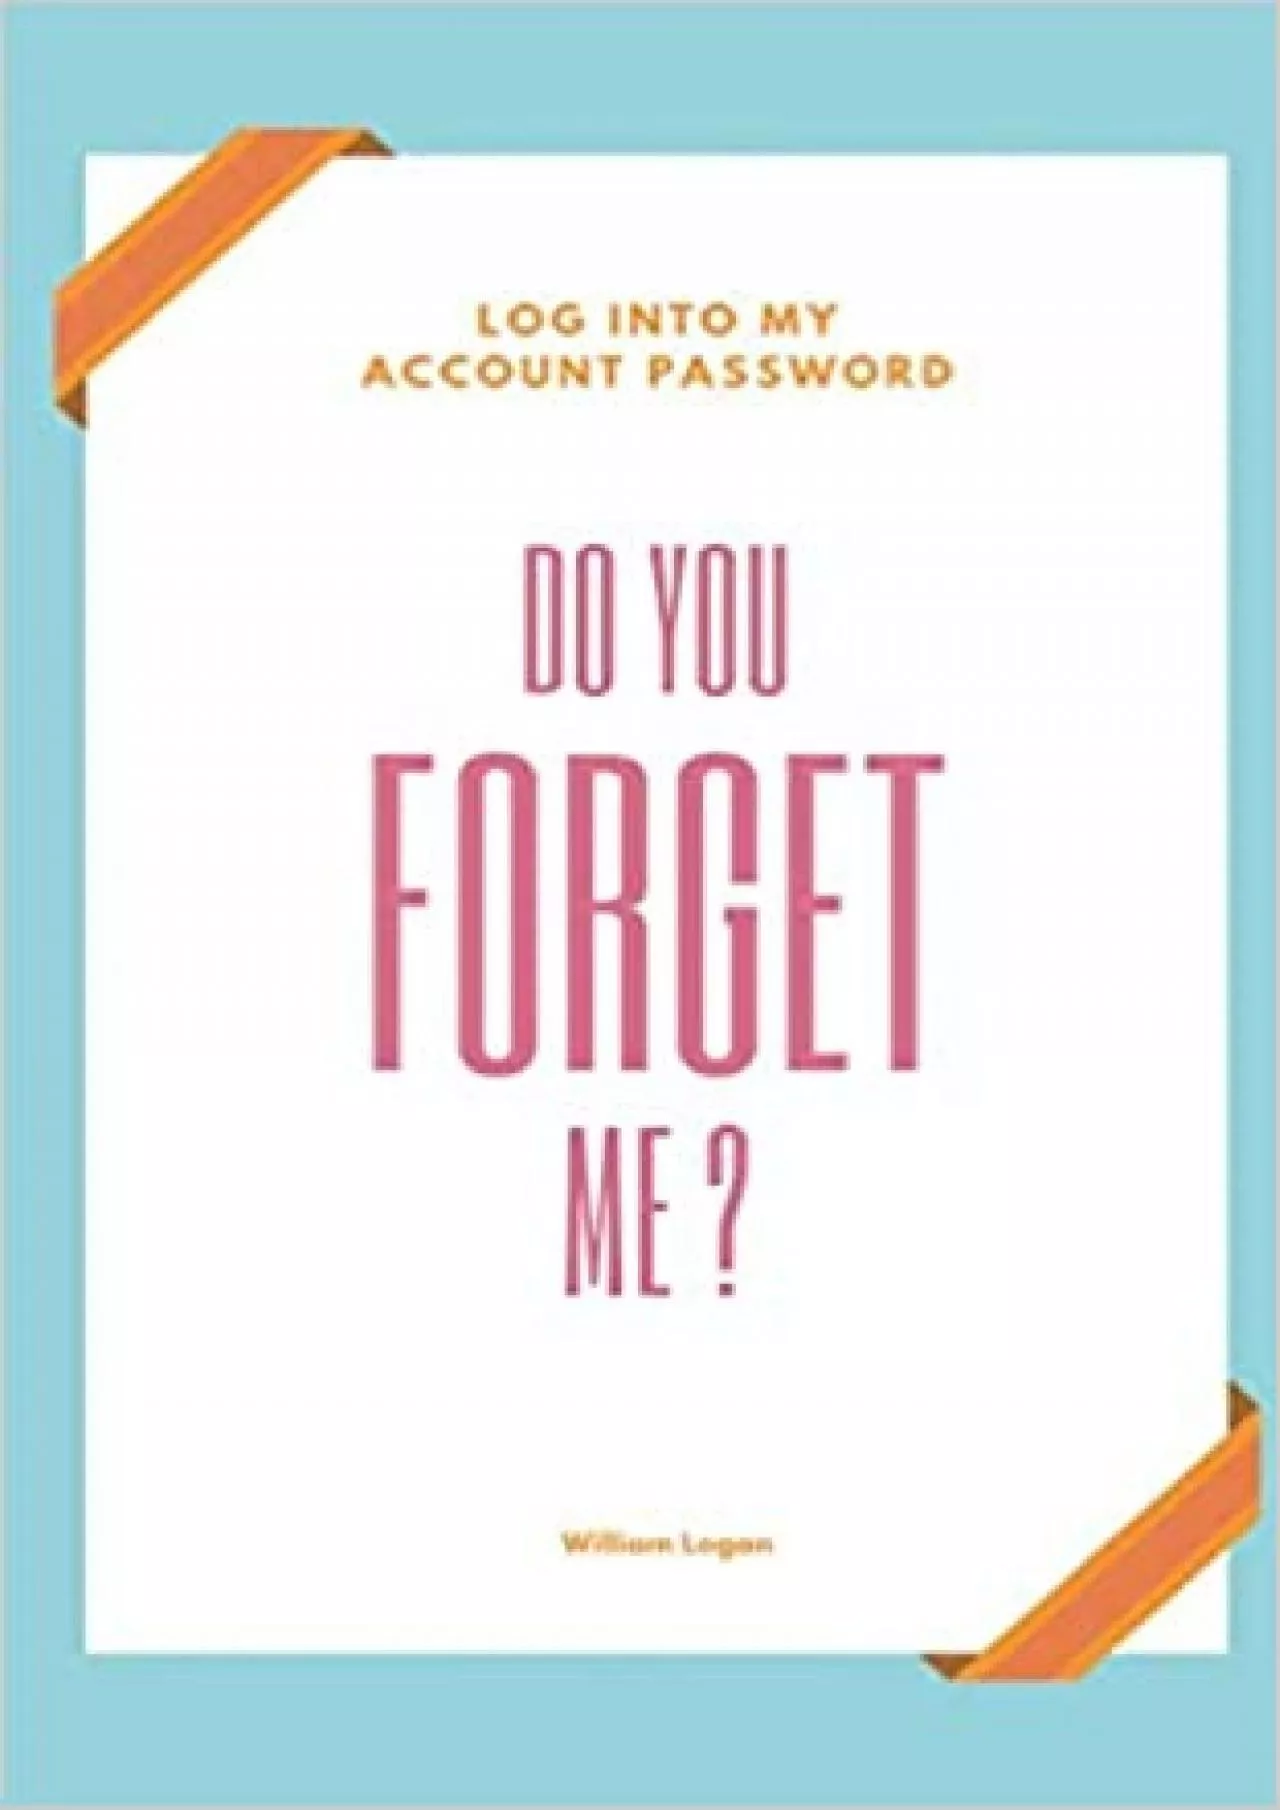 (BOOS)-DO YOU FORGET ME ? - Log into my account password SIZE 5x8 Internet Log Book with